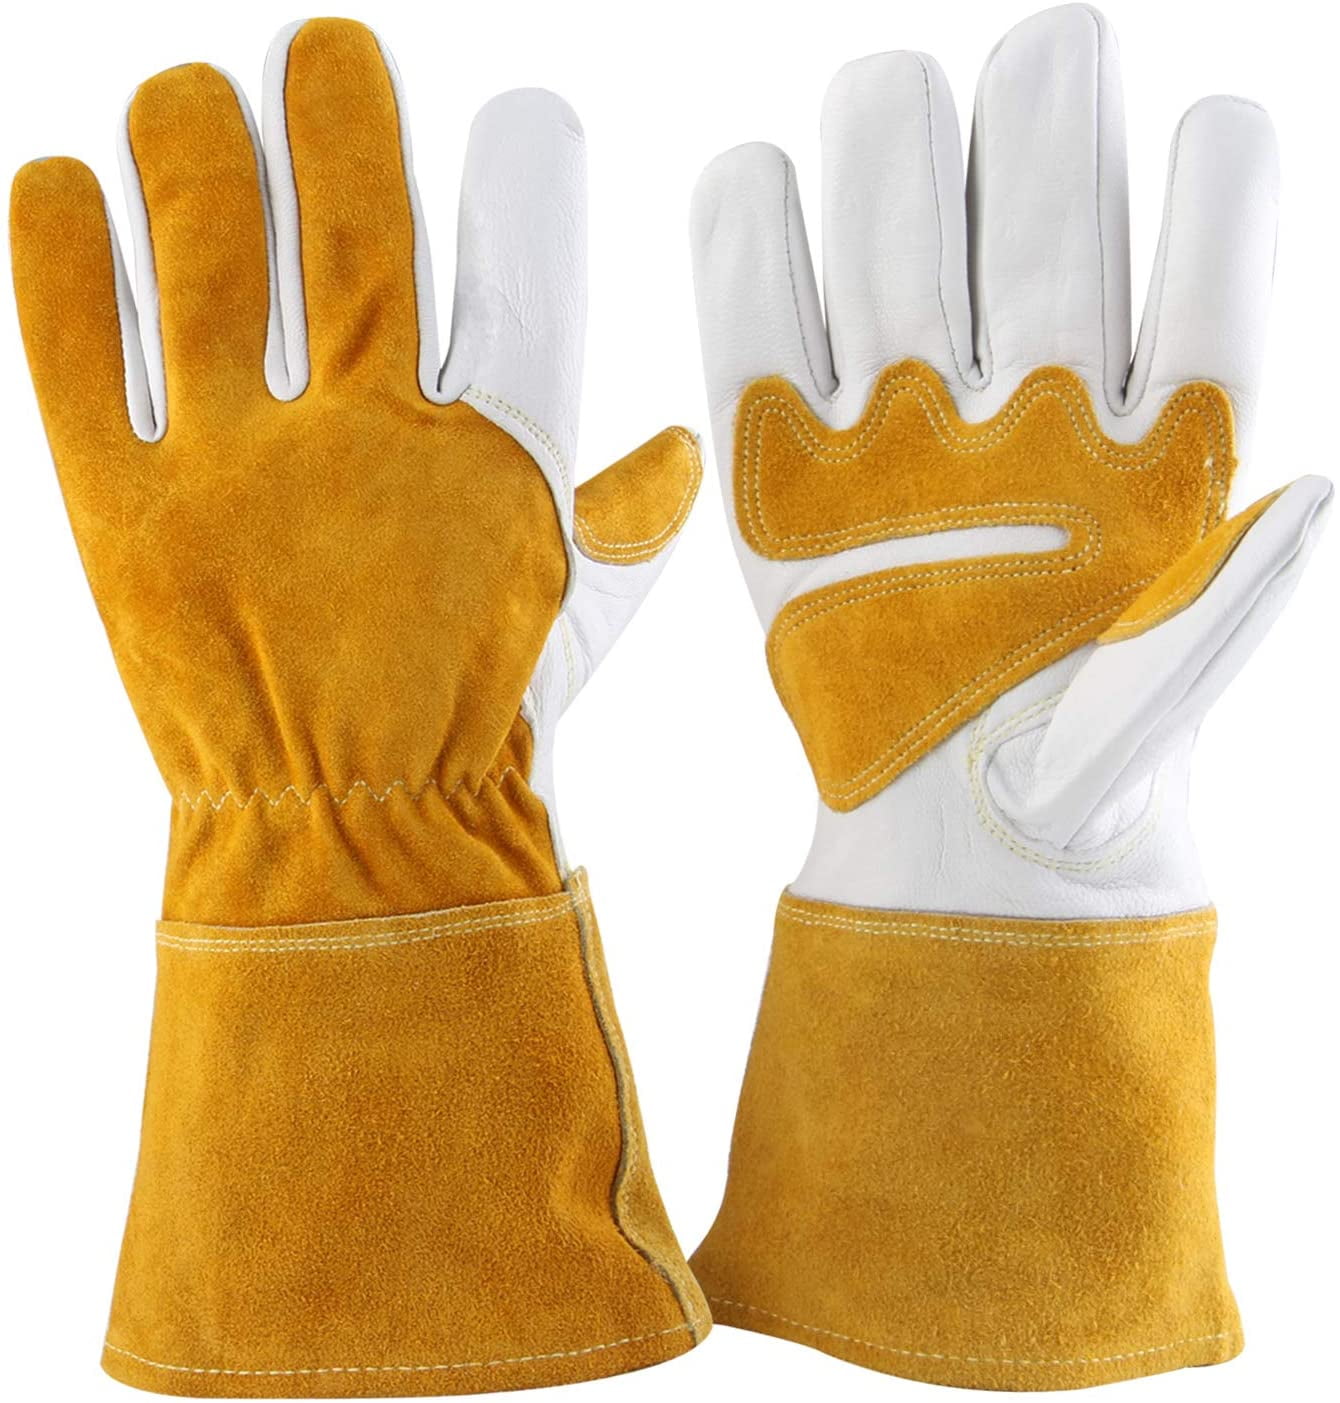 Gardening Gloves for Women/Men L, YELLOW Alomidds Rose Pruning Thorn & Cut Proof Long Elbow Durable Cowhide Leather Gardening Gloves for Pruning Cacti Rose and Thorny Bushes